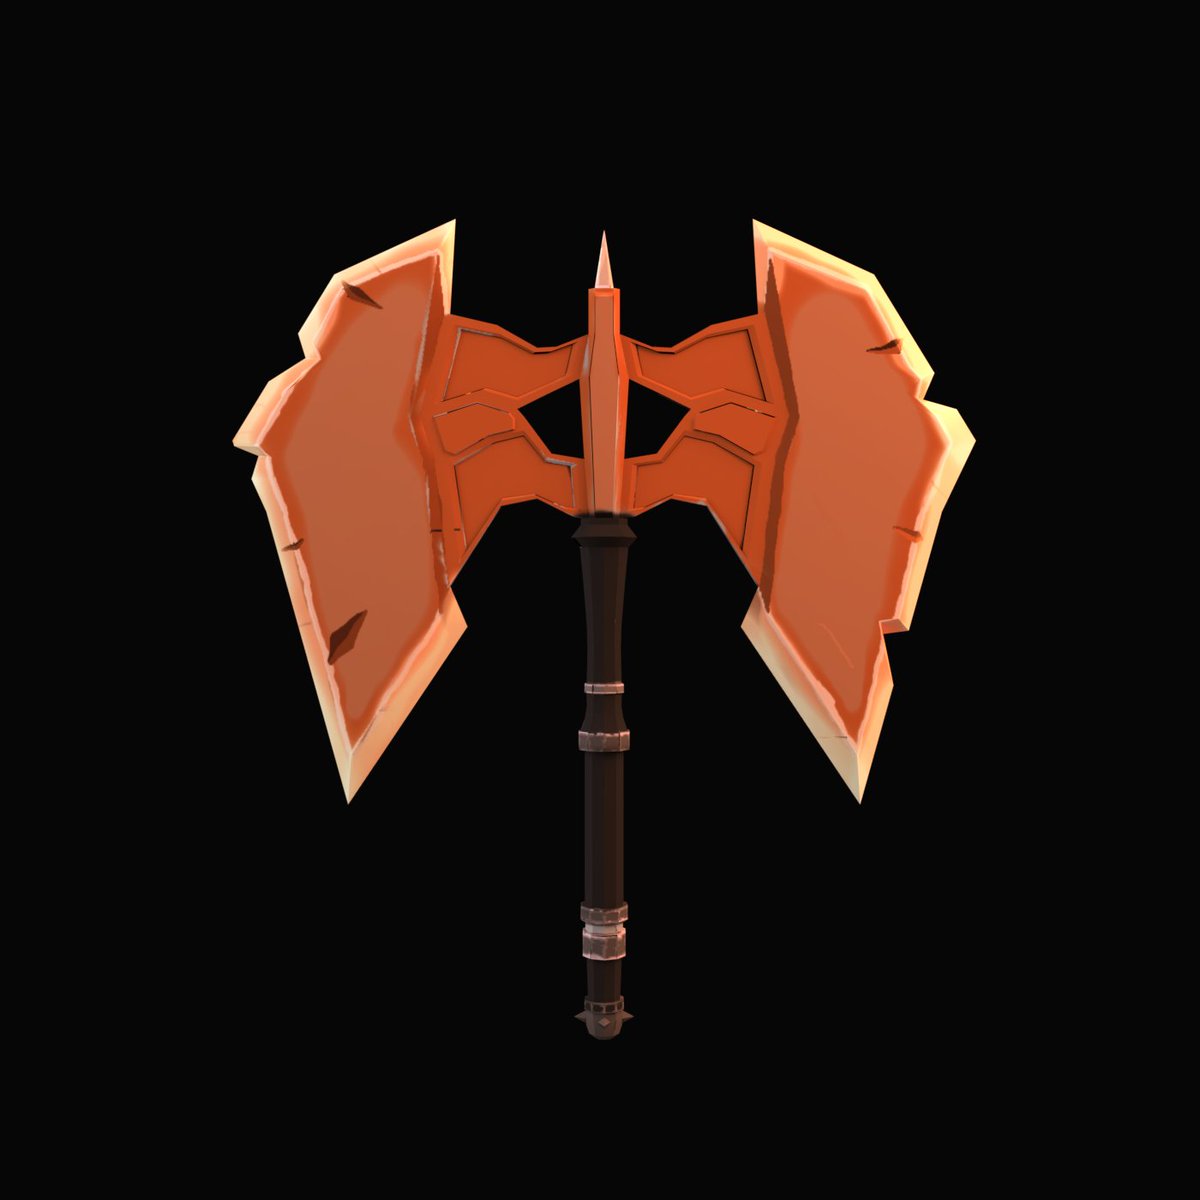 Another Texture Paiting Test with Blender! Fire Axe~

#Blender3d #videogames #axe #indiedev #gamedev #myfuel #art #cg #3dart  #gameart #fantasy #Elementary #coffeetime #goodafternoon #nofilter #fire #AreYouReady #texture #nodes #madebyme #conceptart #photoshop